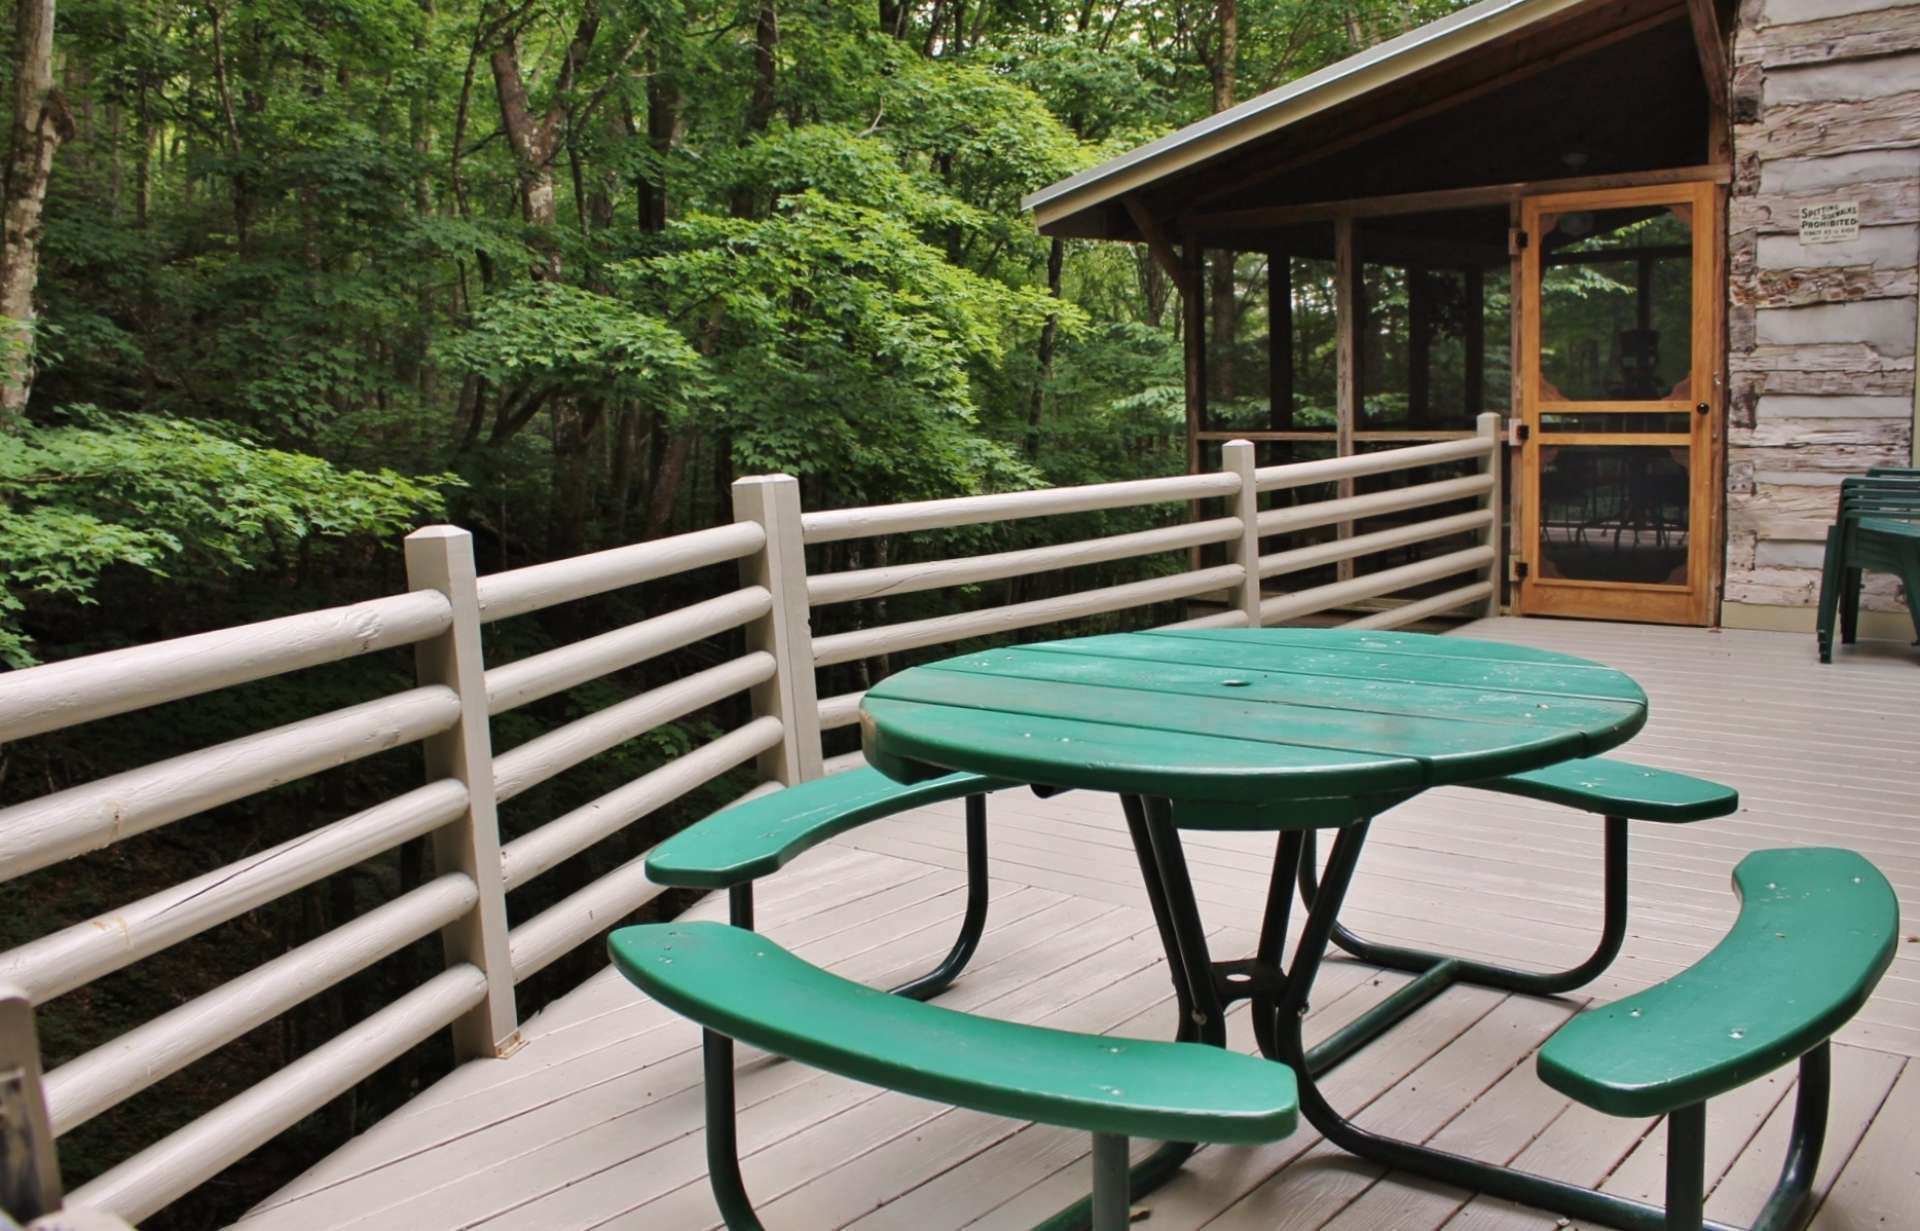 The open deck is ideal for summer barbecues and has stairs leading down to creek.